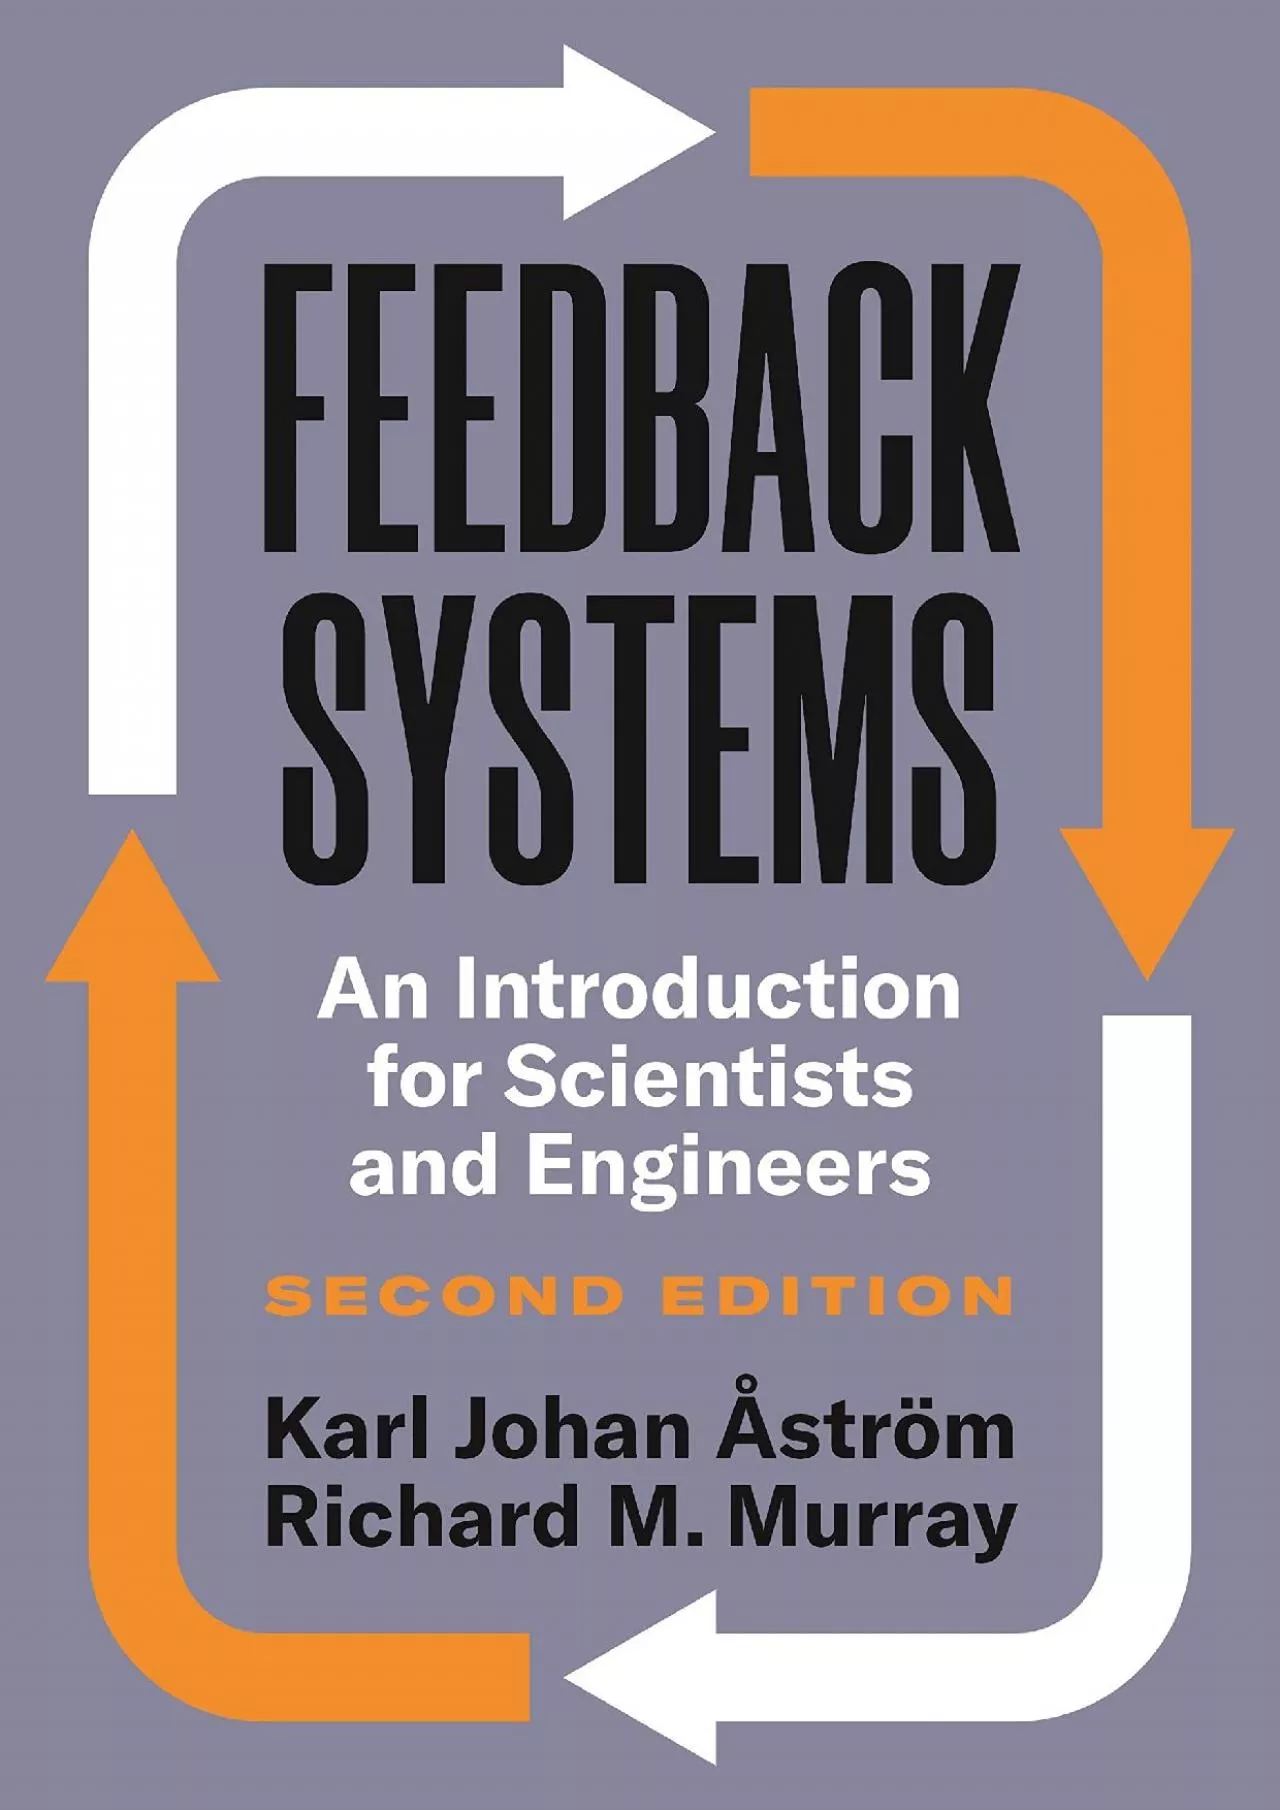 (DOWNLOAD)-Feedback Systems: An Introduction for Scientists and Engineers, Second Edition